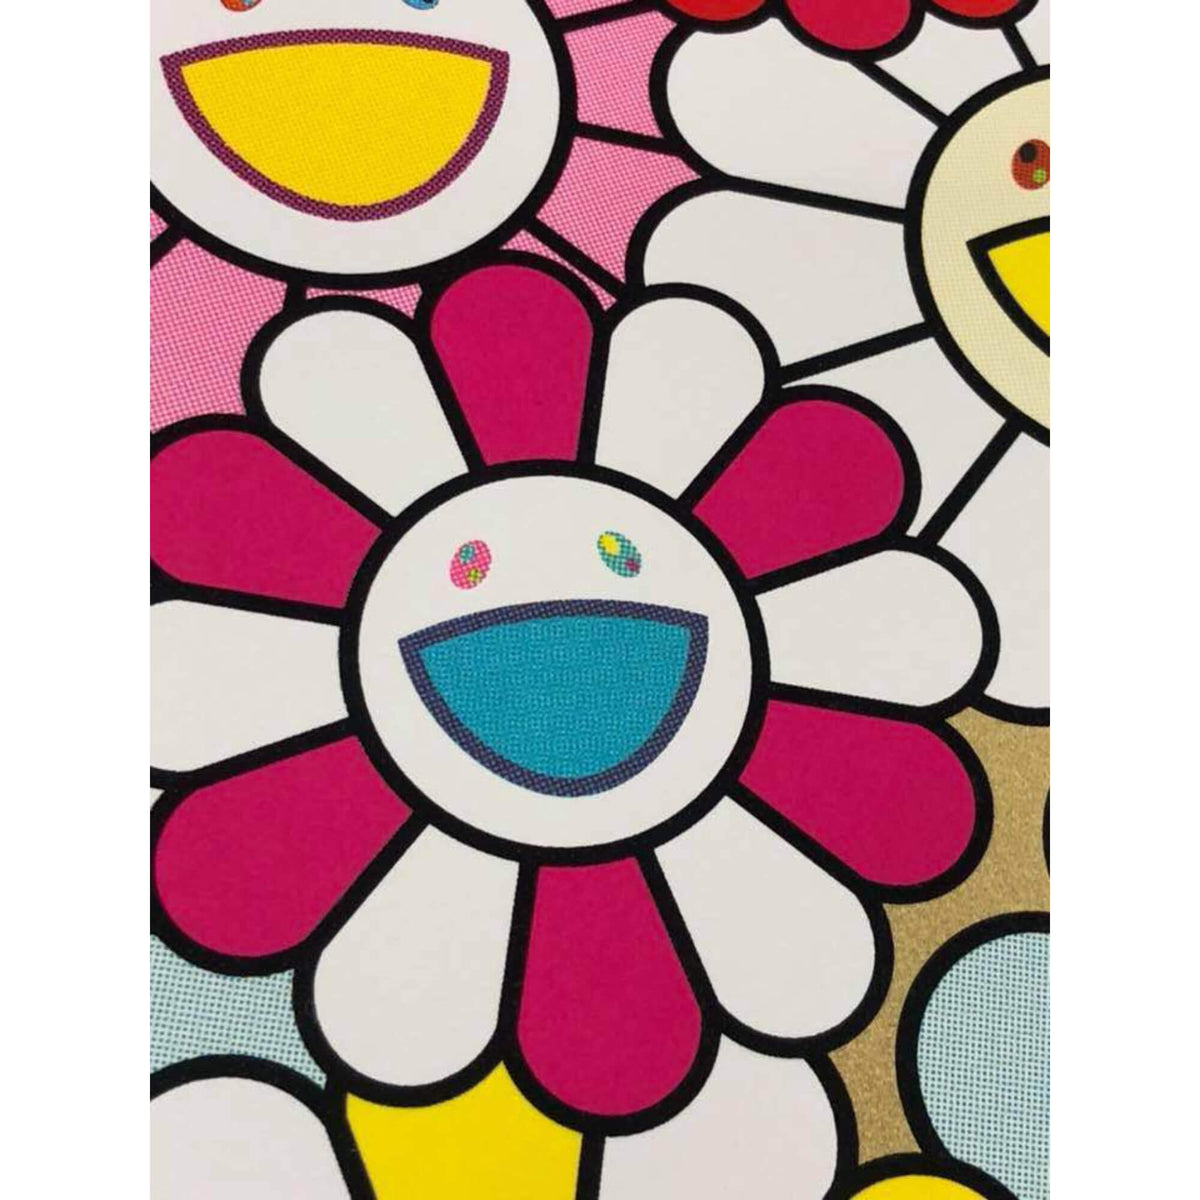 Takashi Murakami - A Little Flower Painting: Pink, Purple and Many Other  Colors for Sale